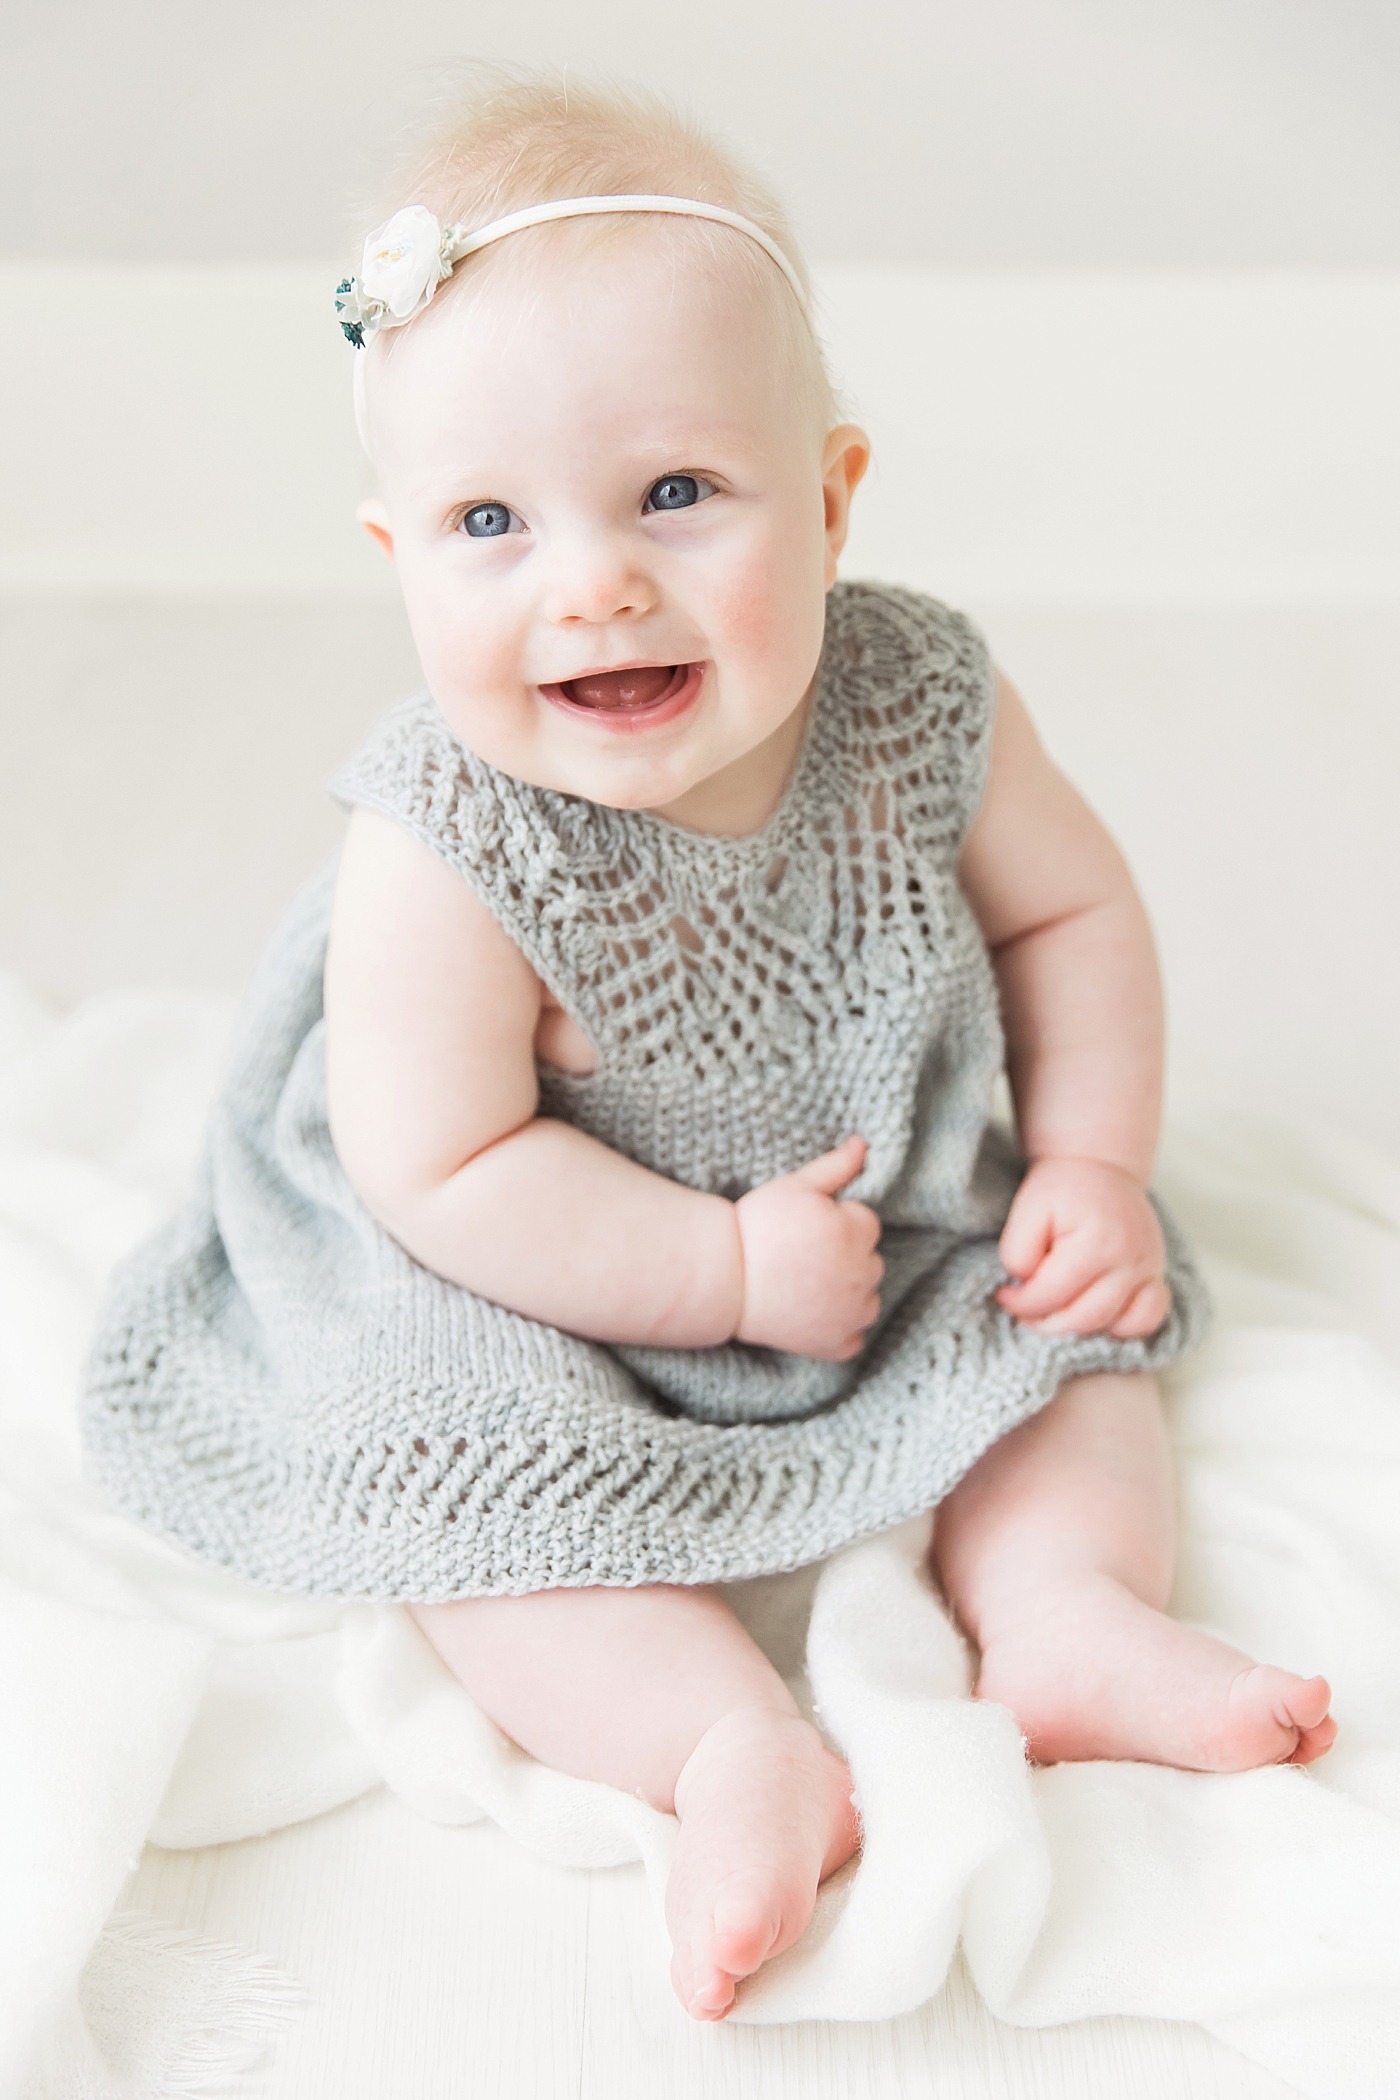 Six month old baby girl laughing and smiling. Photos by Fresh Light Photography.